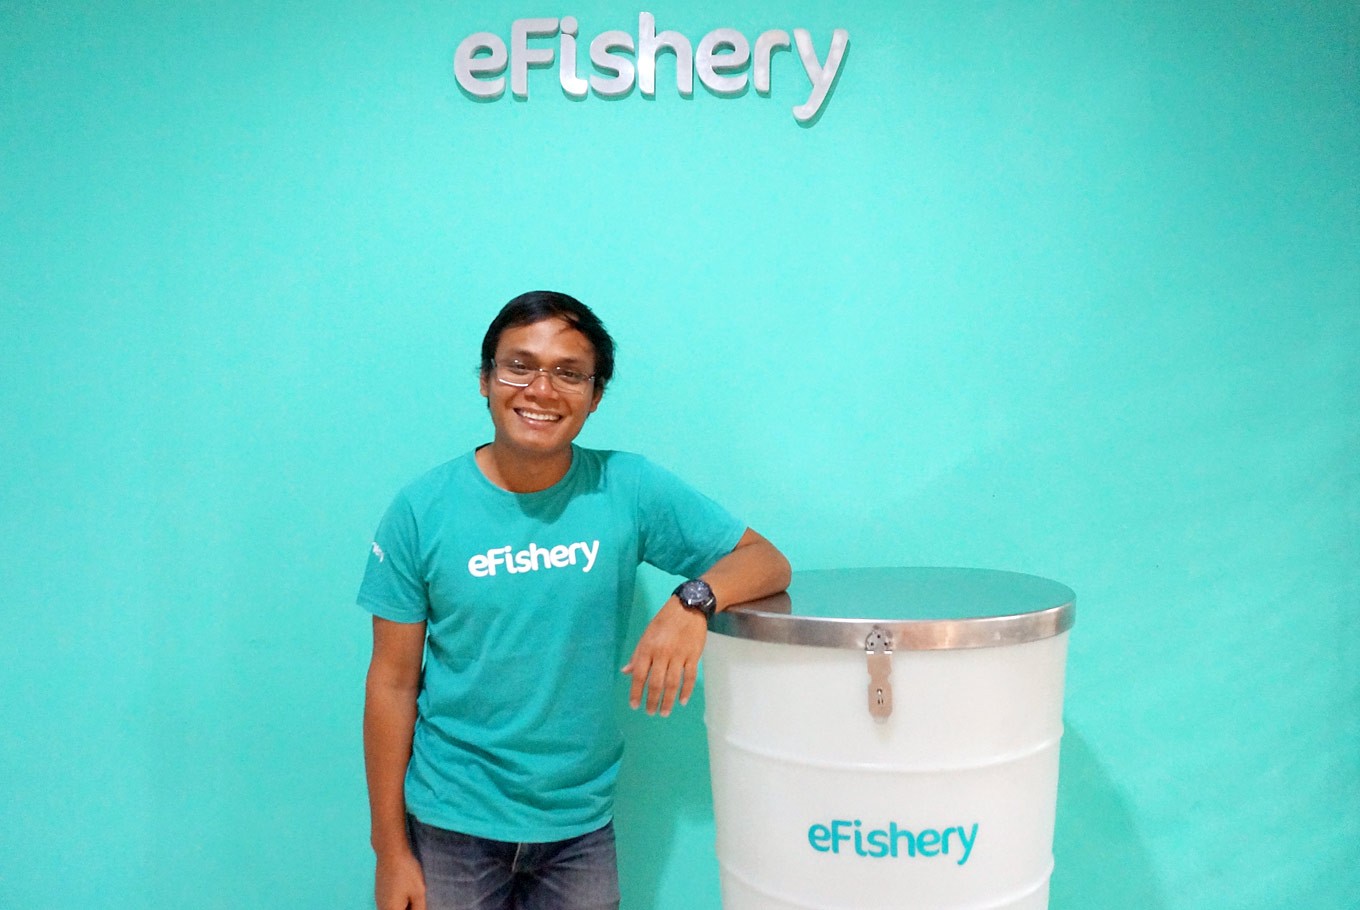 Daily Markup #417: eFishery reels in US$90M to expand to 10 countries; Easyship brought innovation to crowdfunding in 2021; Lingokids introduces 10M new families to playlearning